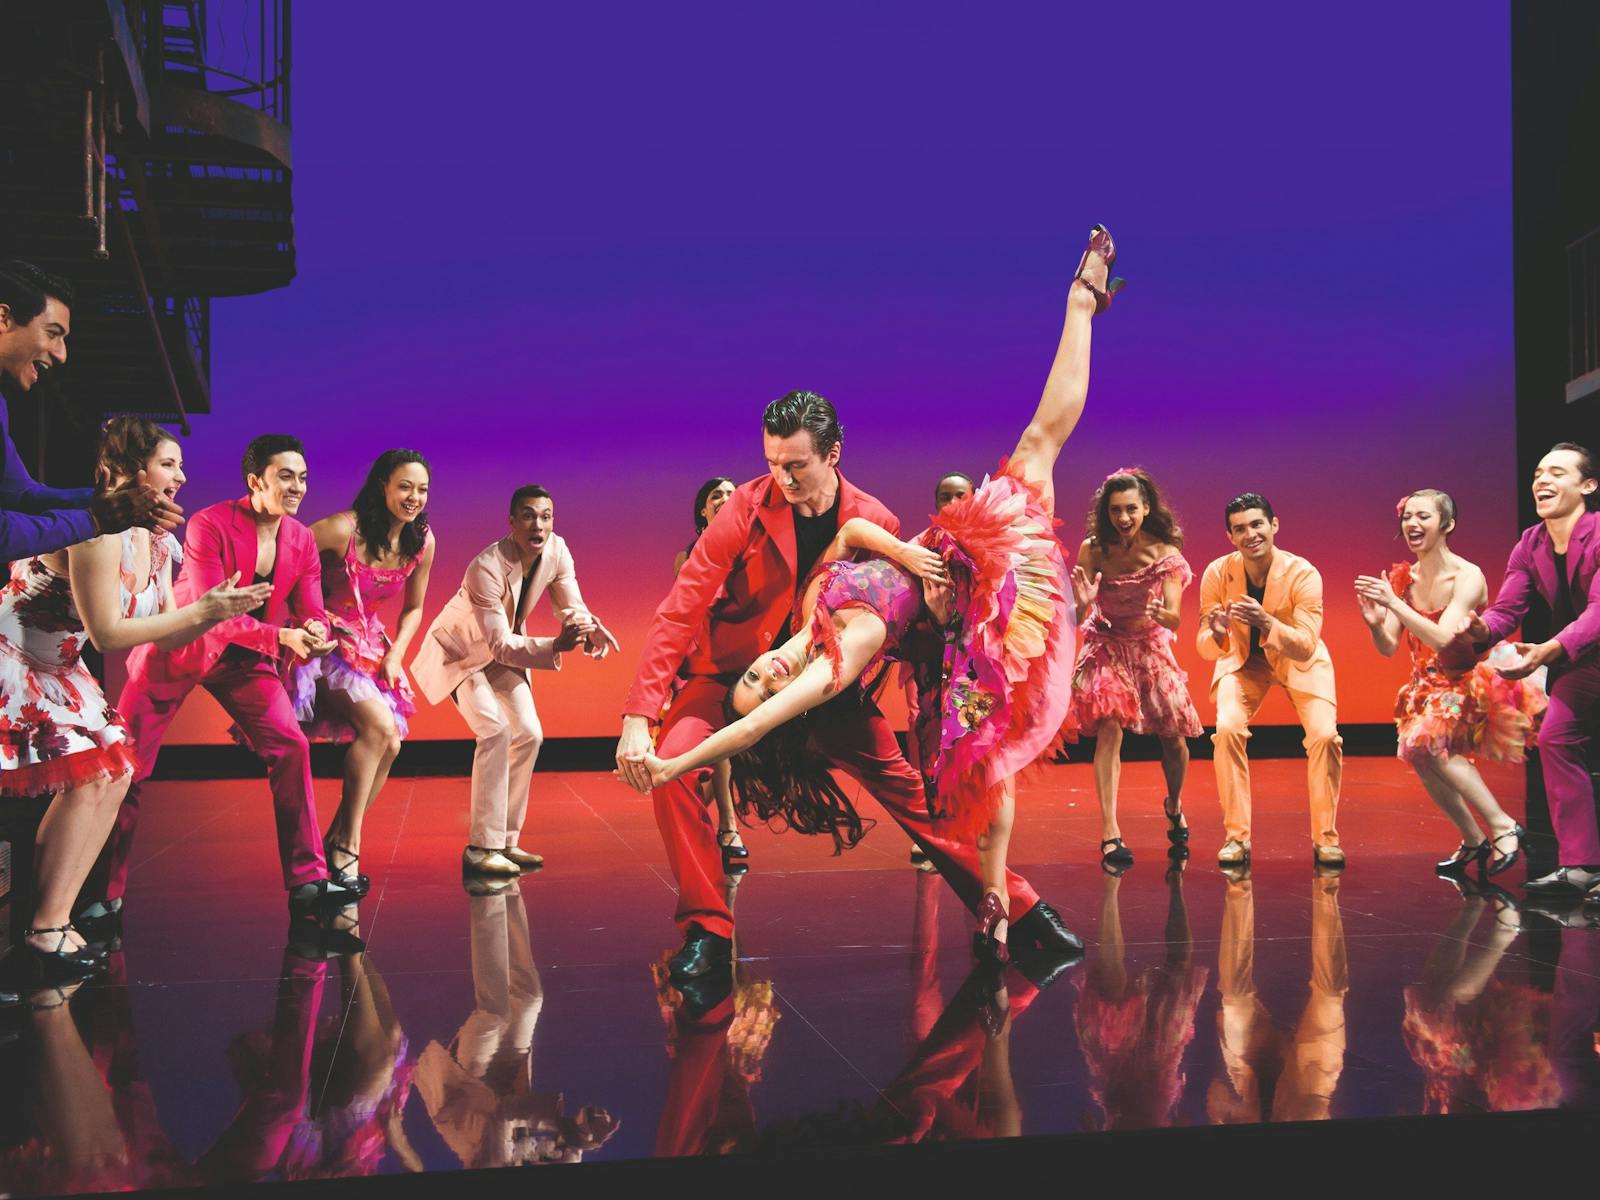 Image for West Side Story